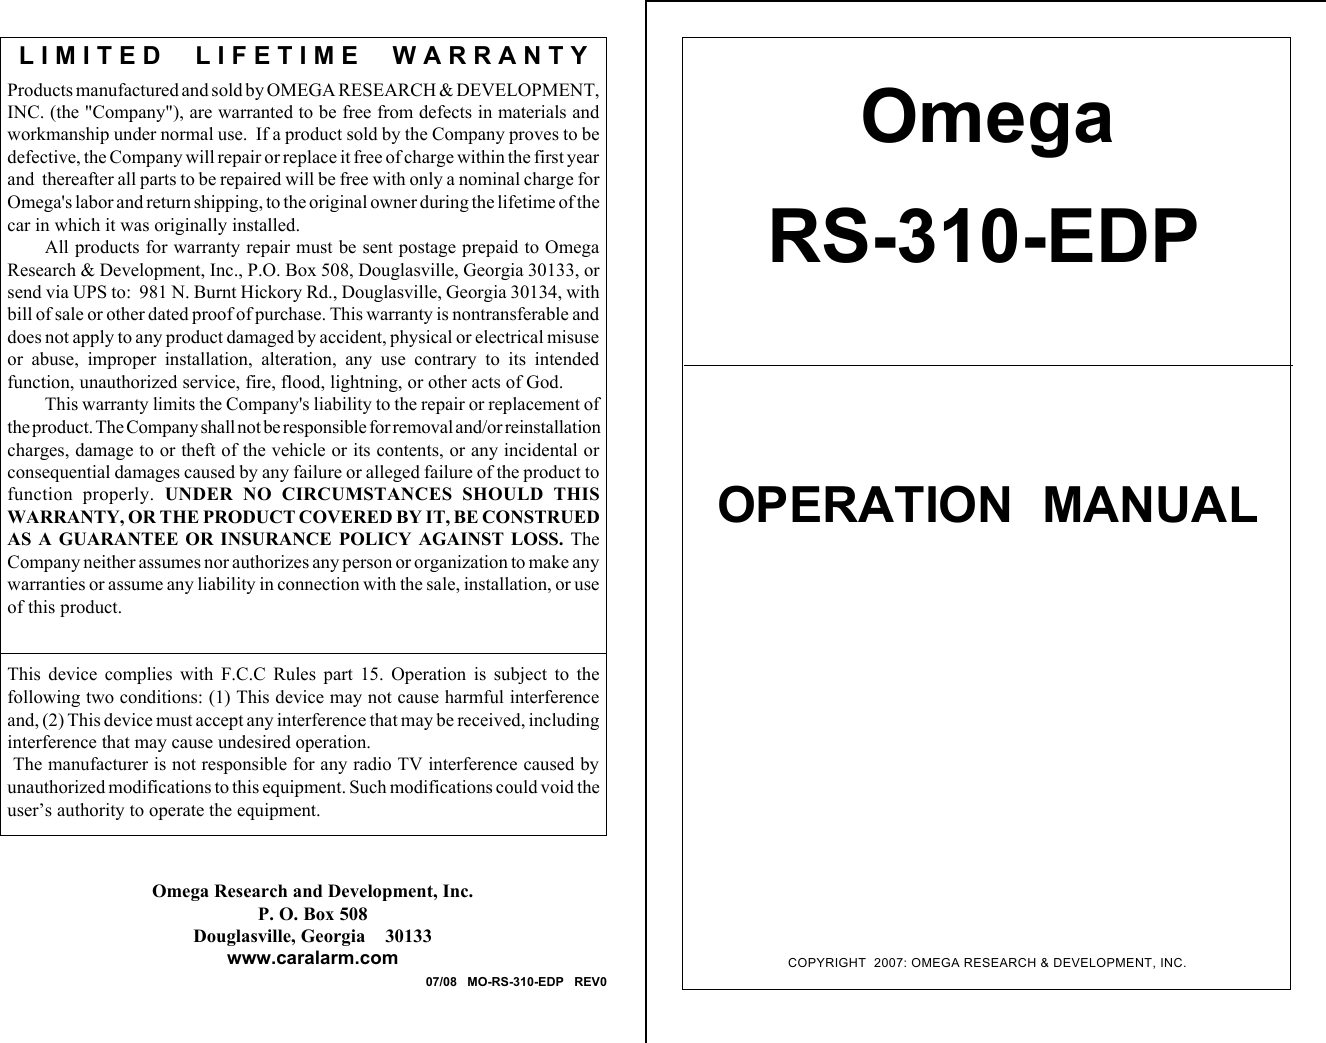 COPYRIGHT  2007: OMEGA RESEARCH &amp; DEVELOPMENT, INC.OmegaRS-310-EDPOPERATION  MANUALProducts manufactured and sold by OMEGA RESEARCH &amp; DEVELOPMENT,INC. (the &quot;Company&quot;), are warranted to be free from defects in materials andworkmanship under normal use.  If a product sold by the Company proves to bedefective, the Company will repair or replace it free of charge within the first yearand  thereafter all parts to be repaired will be free with only a nominal charge forOmega&apos;s labor and return shipping, to the original owner during the lifetime of thecar in which it was originally installed.All products for warranty repair must be sent postage prepaid to OmegaResearch &amp; Development, Inc., P.O. Box 508, Douglasville, Georgia 30133, orsend via UPS to:  981 N. Burnt Hickory Rd., Douglasville, Georgia 30134, withbill of sale or other dated proof of purchase. This warranty is nontransferable anddoes not apply to any product damaged by accident, physical or electrical misuseor  abuse,  improper  installation,  alteration,  any  use  contrary  to  its  intendedfunction, unauthorized service, fire, flood, lightning, or other acts of God.This warranty limits the Company&apos;s liability to the repair or replacement ofthe product. The Company shall not be responsible for removal and/or reinstallationcharges, damage to or theft of the vehicle or its contents, or any incidental orconsequential damages caused by any failure or alleged failure of the product tofunction  properly.  UNDER  NO  CIRCUMSTANCES  SHOULD  THISWARRANTY, OR THE PRODUCT COVERED BY IT, BE CONSTRUEDAS  A  GUARANTEE  OR  INSURANCE  POLICY  AGAINST  LOSS.  TheCompany neither assumes nor authorizes any person or organization to make anywarranties or assume any liability in connection with the sale, installation, or useof this product.This  device  complies  with  F.C.C  Rules  part  15.  Operation  is  subject  to  thefollowing two conditions: (1) This device may not cause harmful interferenceand, (2) This device must accept any interference that may be received, includinginterference that may cause undesired operation. The manufacturer is not responsible for any radio TV interference caused byunauthorized modifications to this equipment. Such modifications could void theuser’s authority to operate the equipment.L I M I T E D     L I F E T I M E     W A R R A N T YOmega Research and Development, Inc.P. O. Box 508Douglasville, Georgia    30133www.caralarm.com07/08   MO-RS-310-EDP   REV0